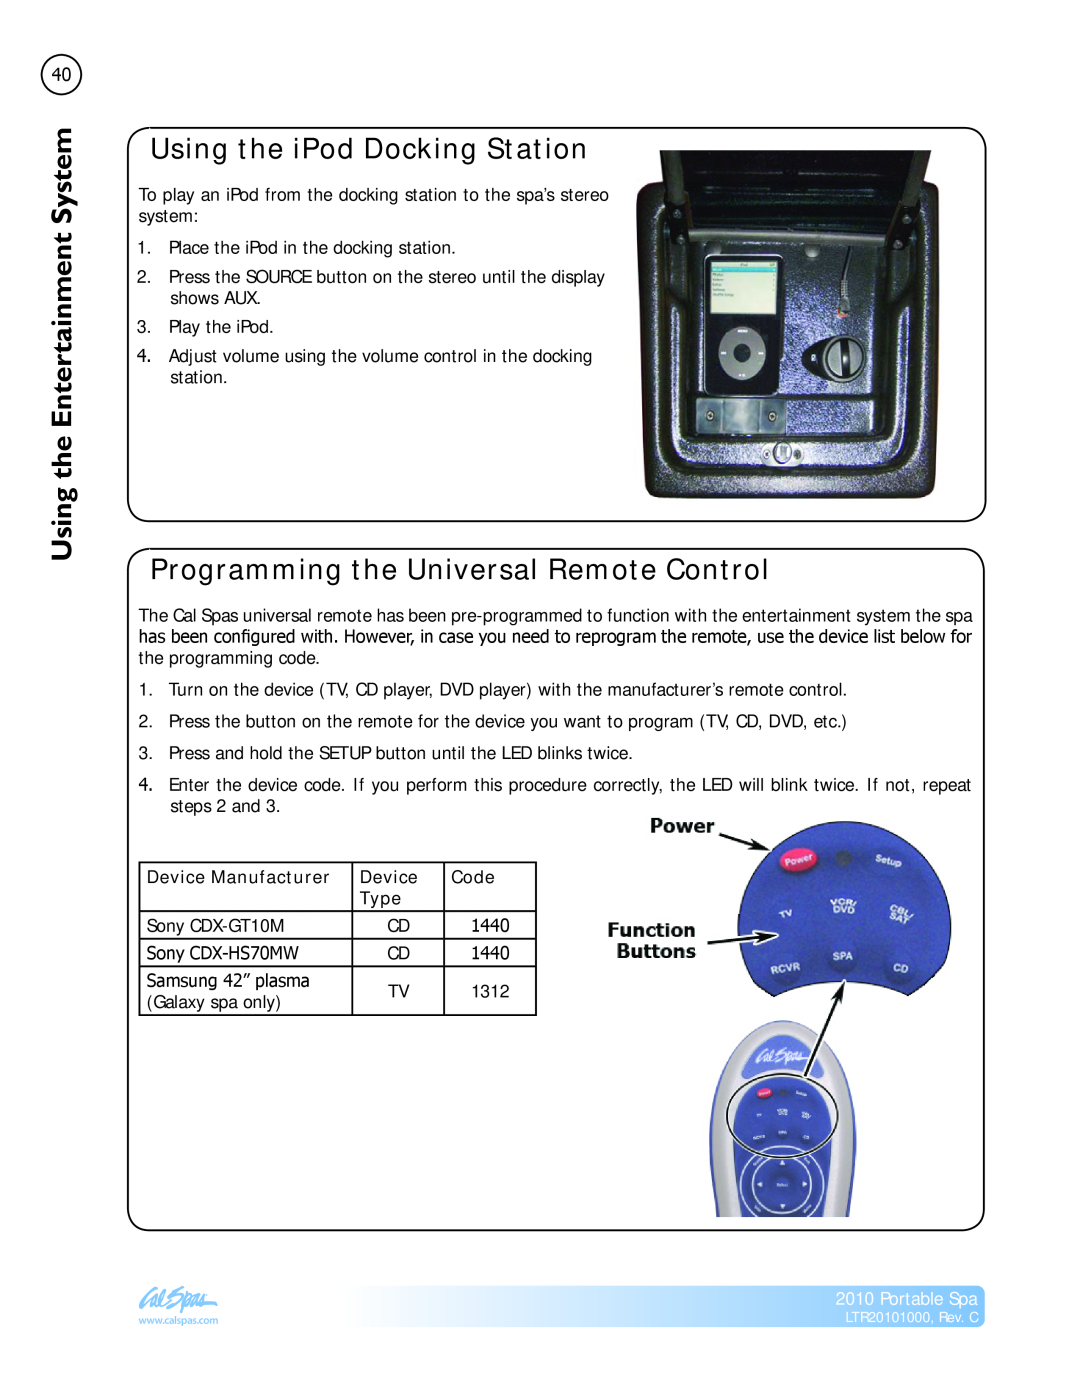 Cal Spas LTR20101000 manual theUsing SystemEntertainment, Using the iPod Docking Station, Device Manufacturer, Code, Type 